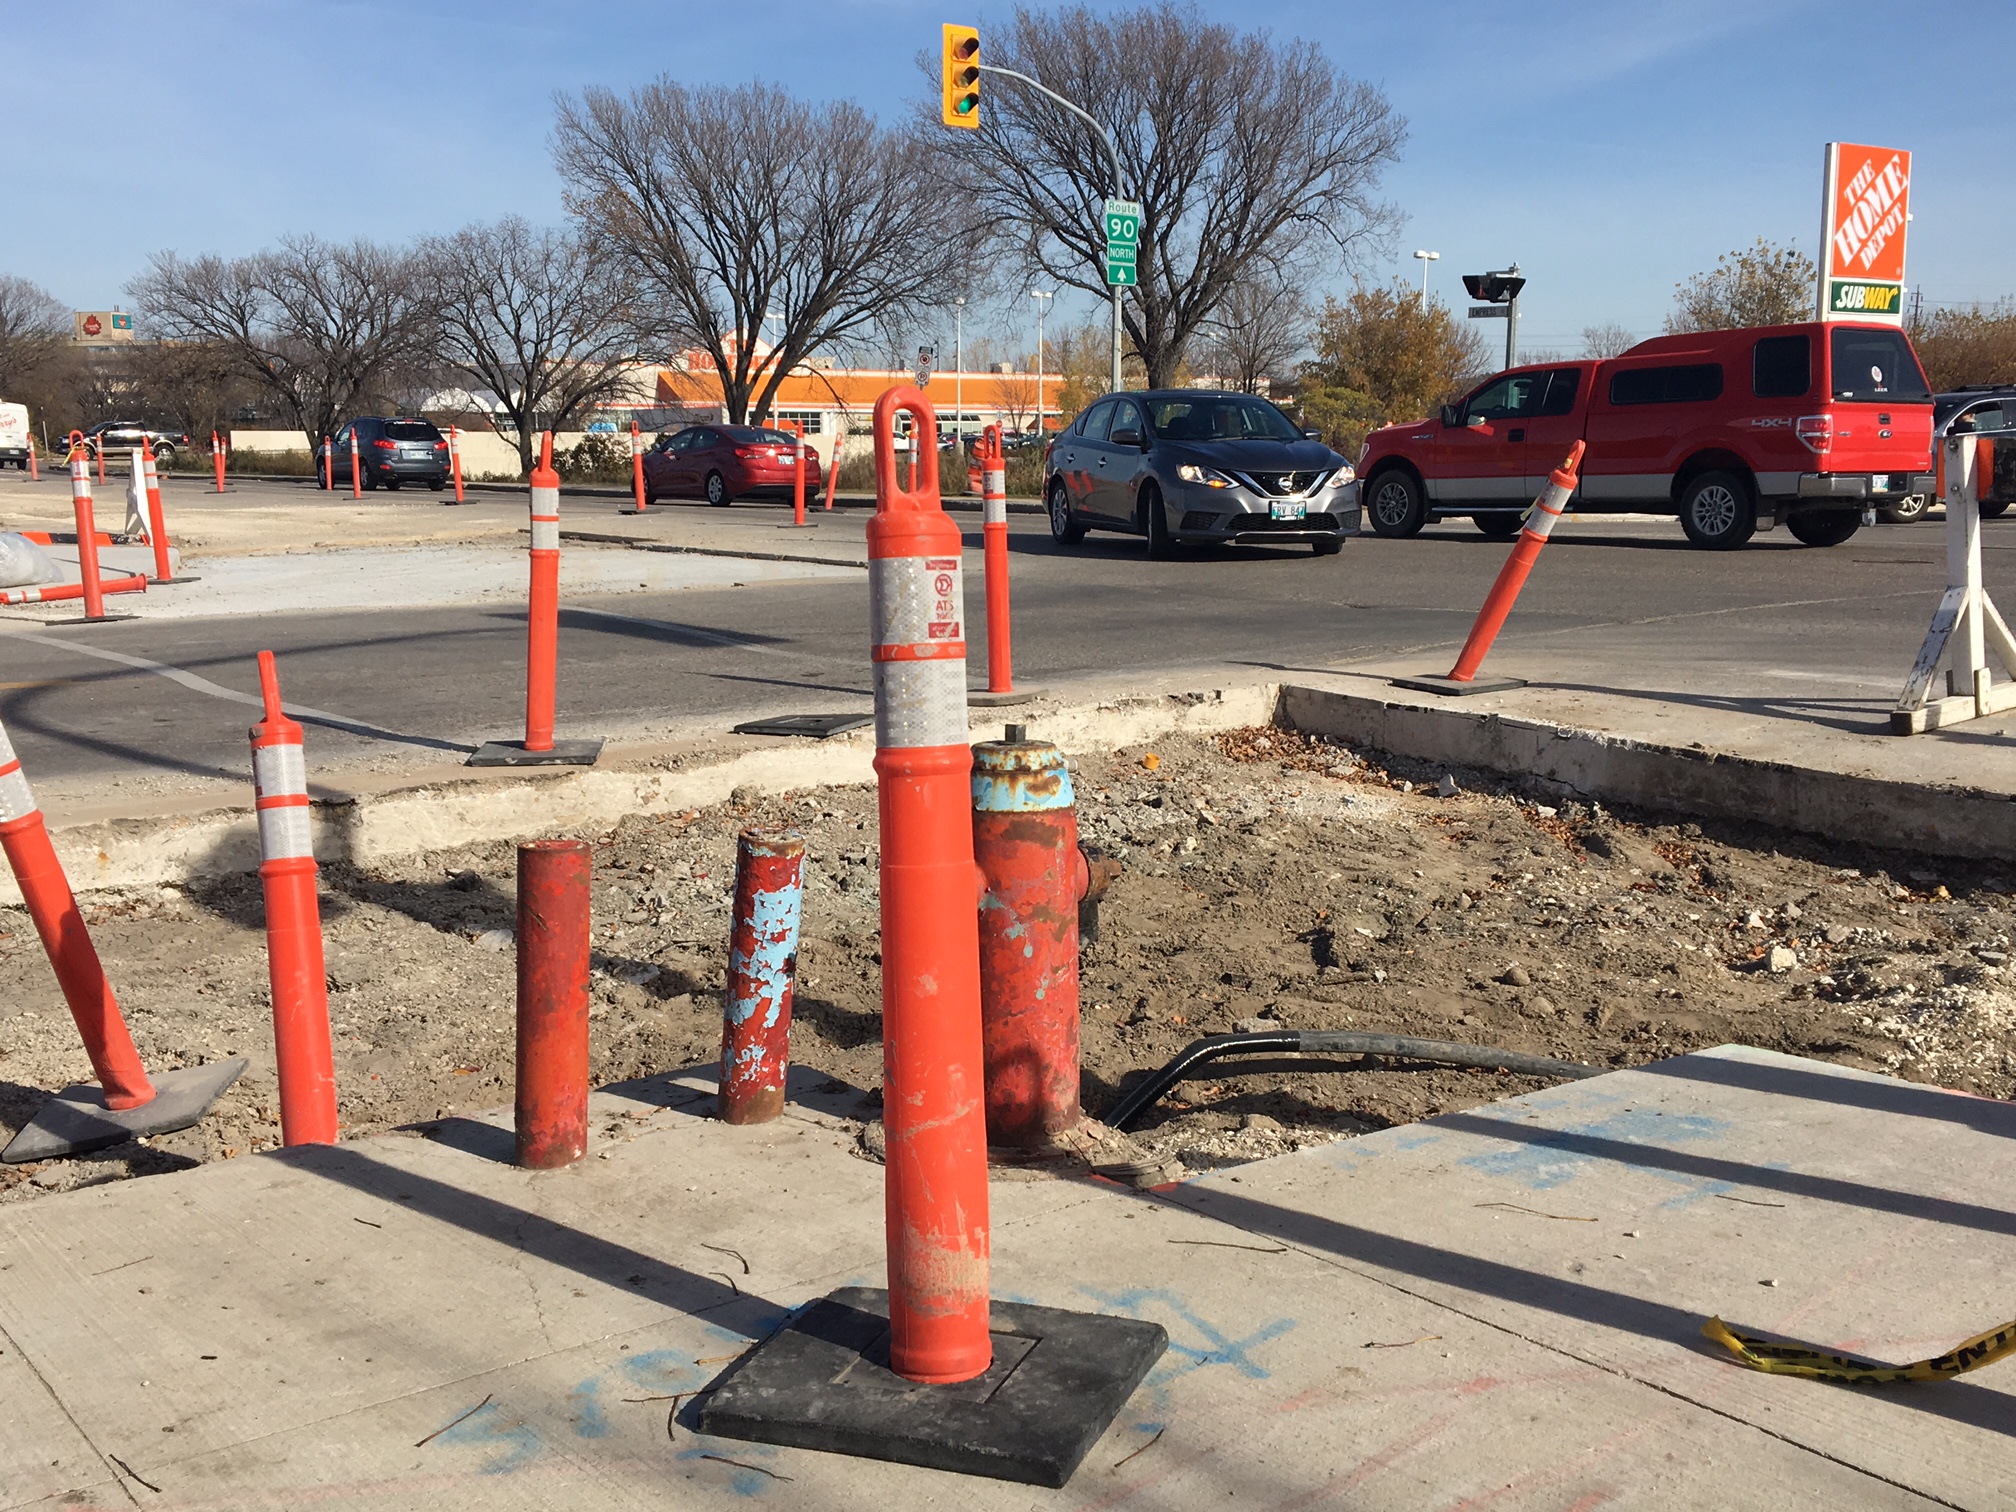 ‘We need to fix the roads’: Busy spring and summer ahead for Winnipeg roadwork